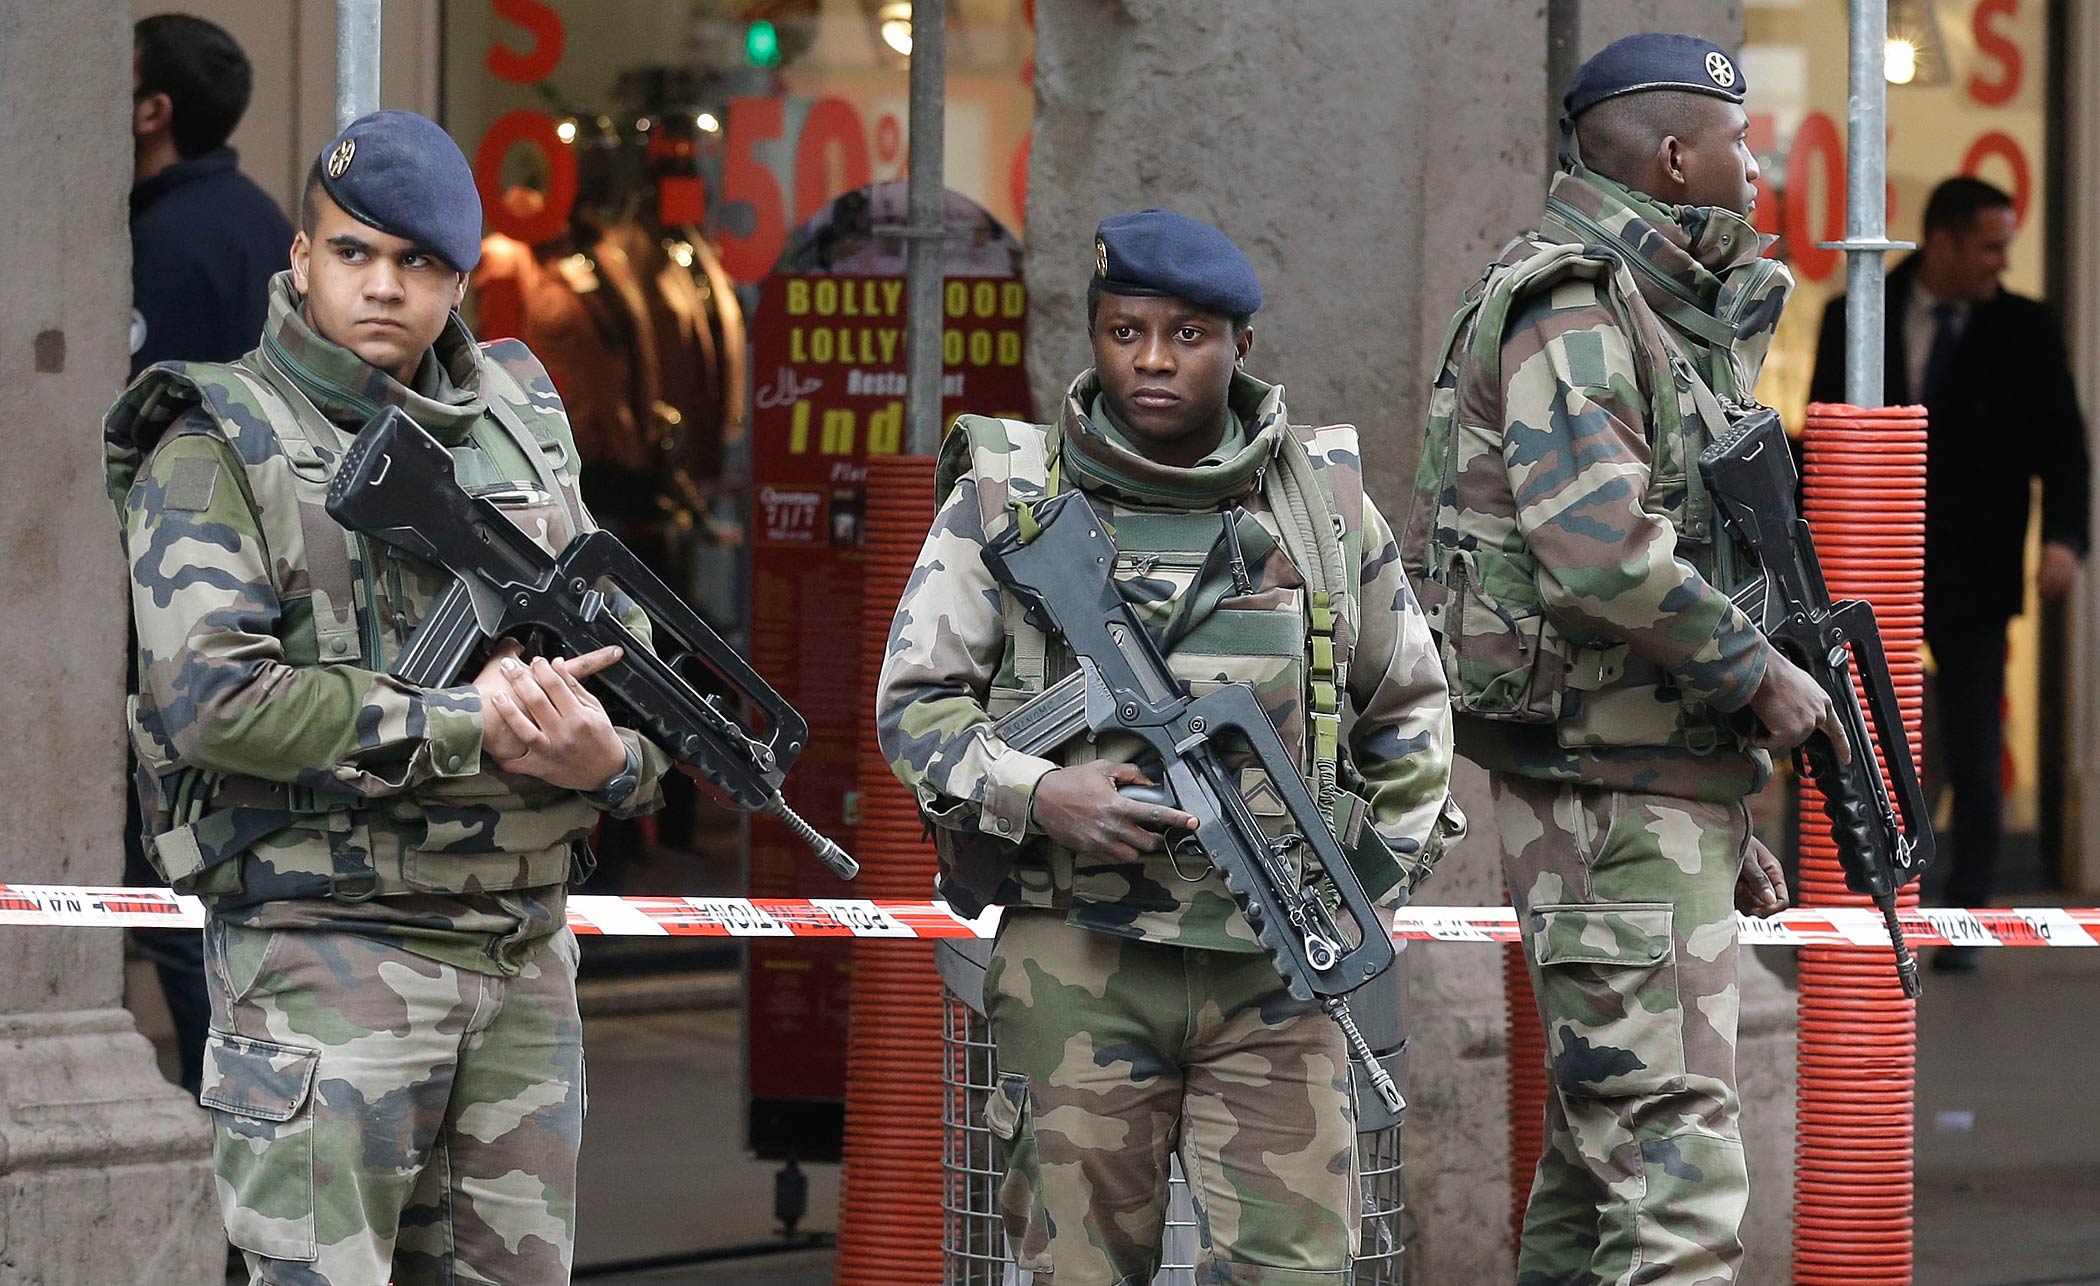 Soldiers stand guard after an attacker with a knife hidden in his bag attacked three soldiers on an antiterrorism patrol in front of a Jewish community center in Nice, France, on Feb. 3, 2015 (Lionel Cironneau—AP)